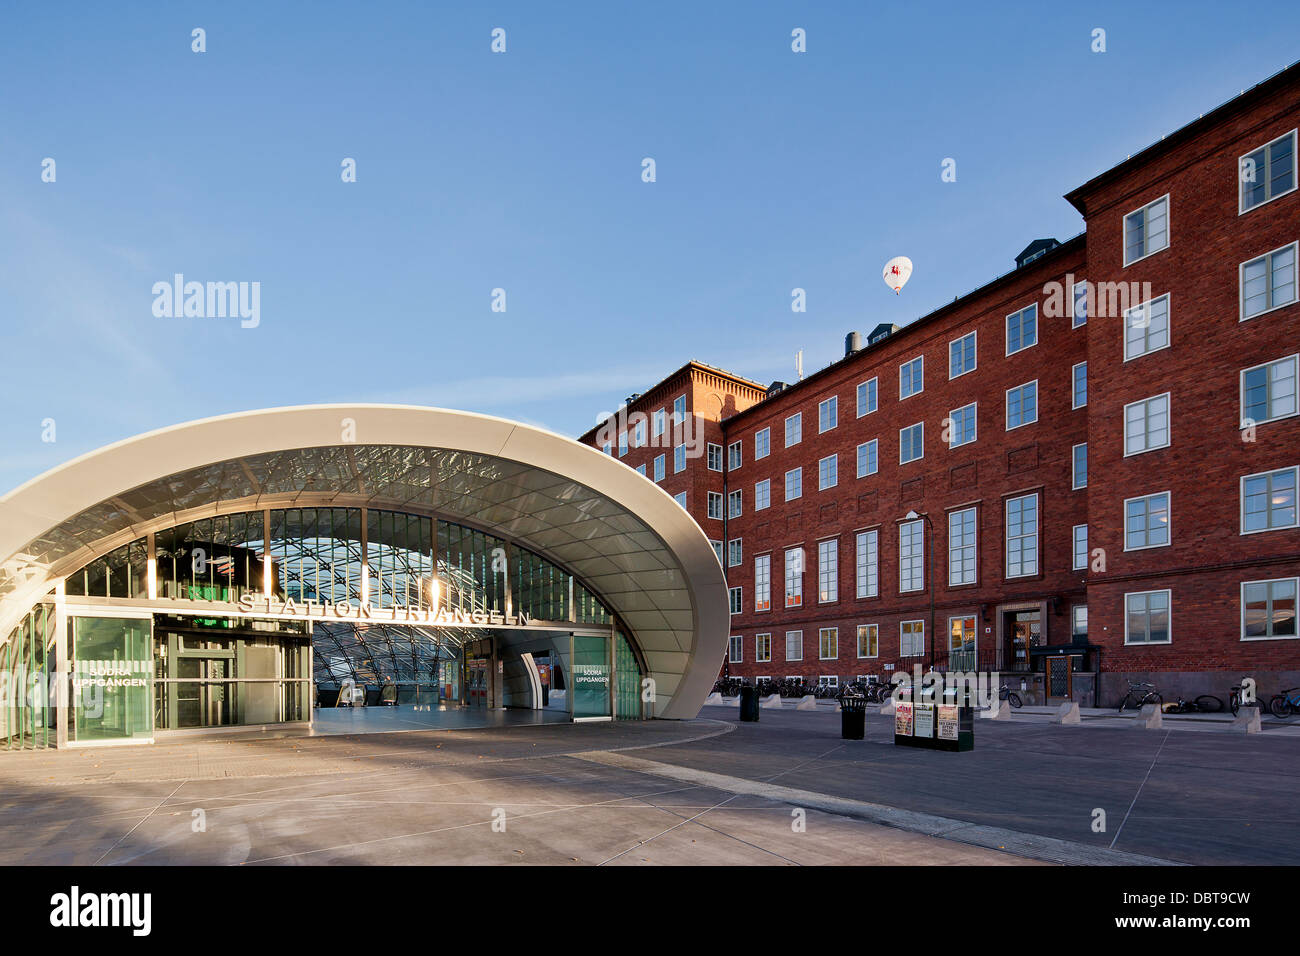 View of Triangeln railroad station and buildings Stock Photo